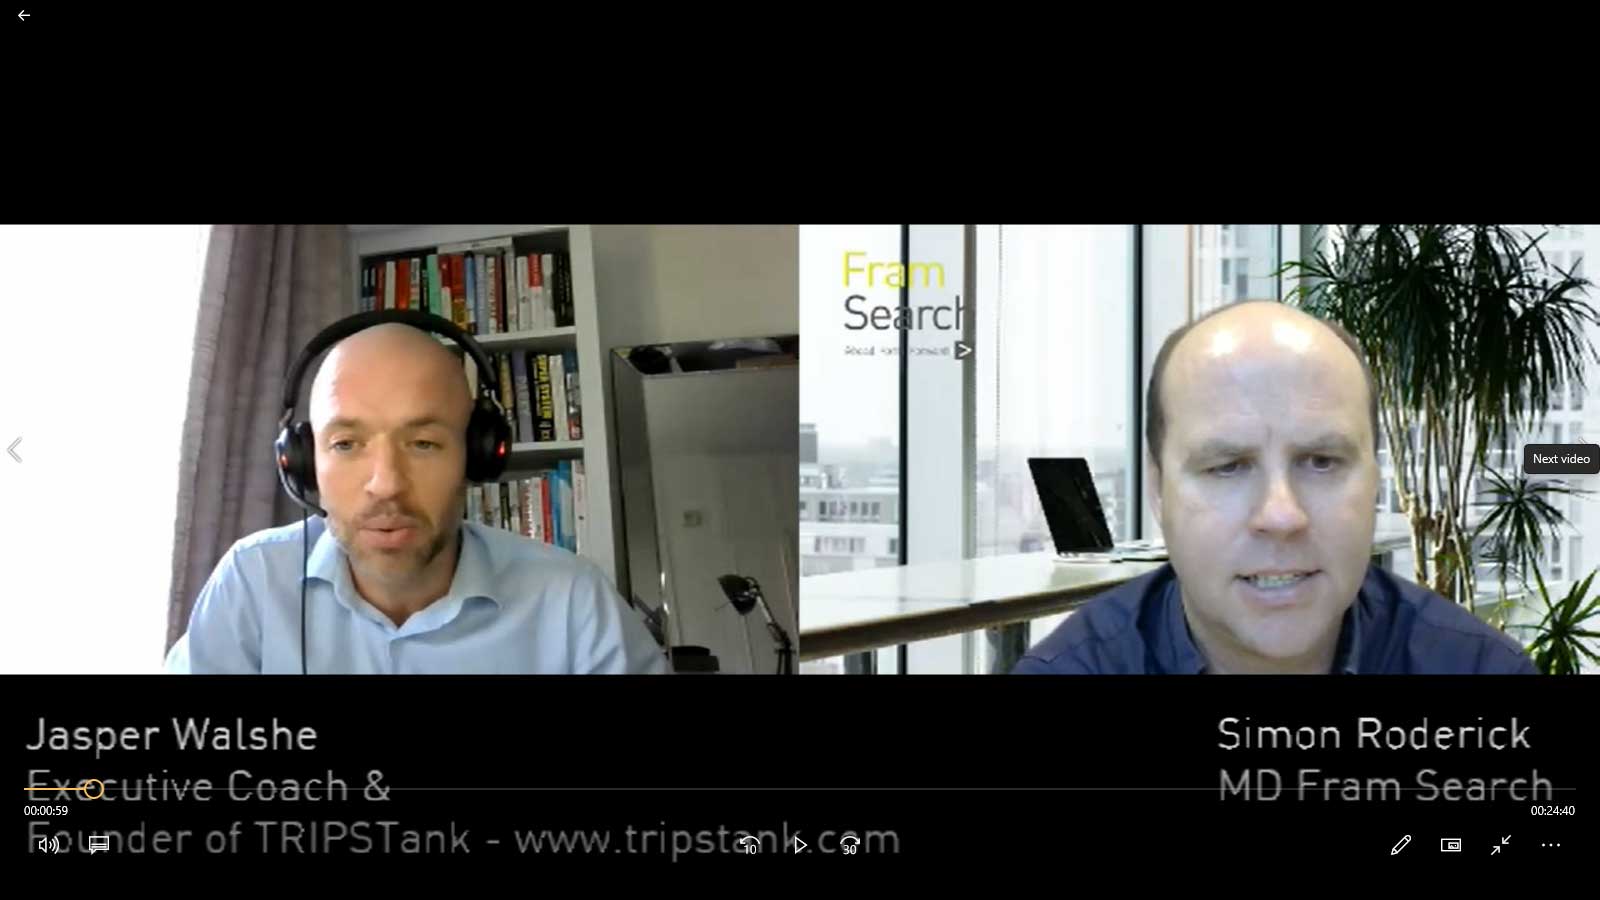 Featured image for “Interview with Jasper Walshe, Executive Coach & Founder of TRIPSTank”